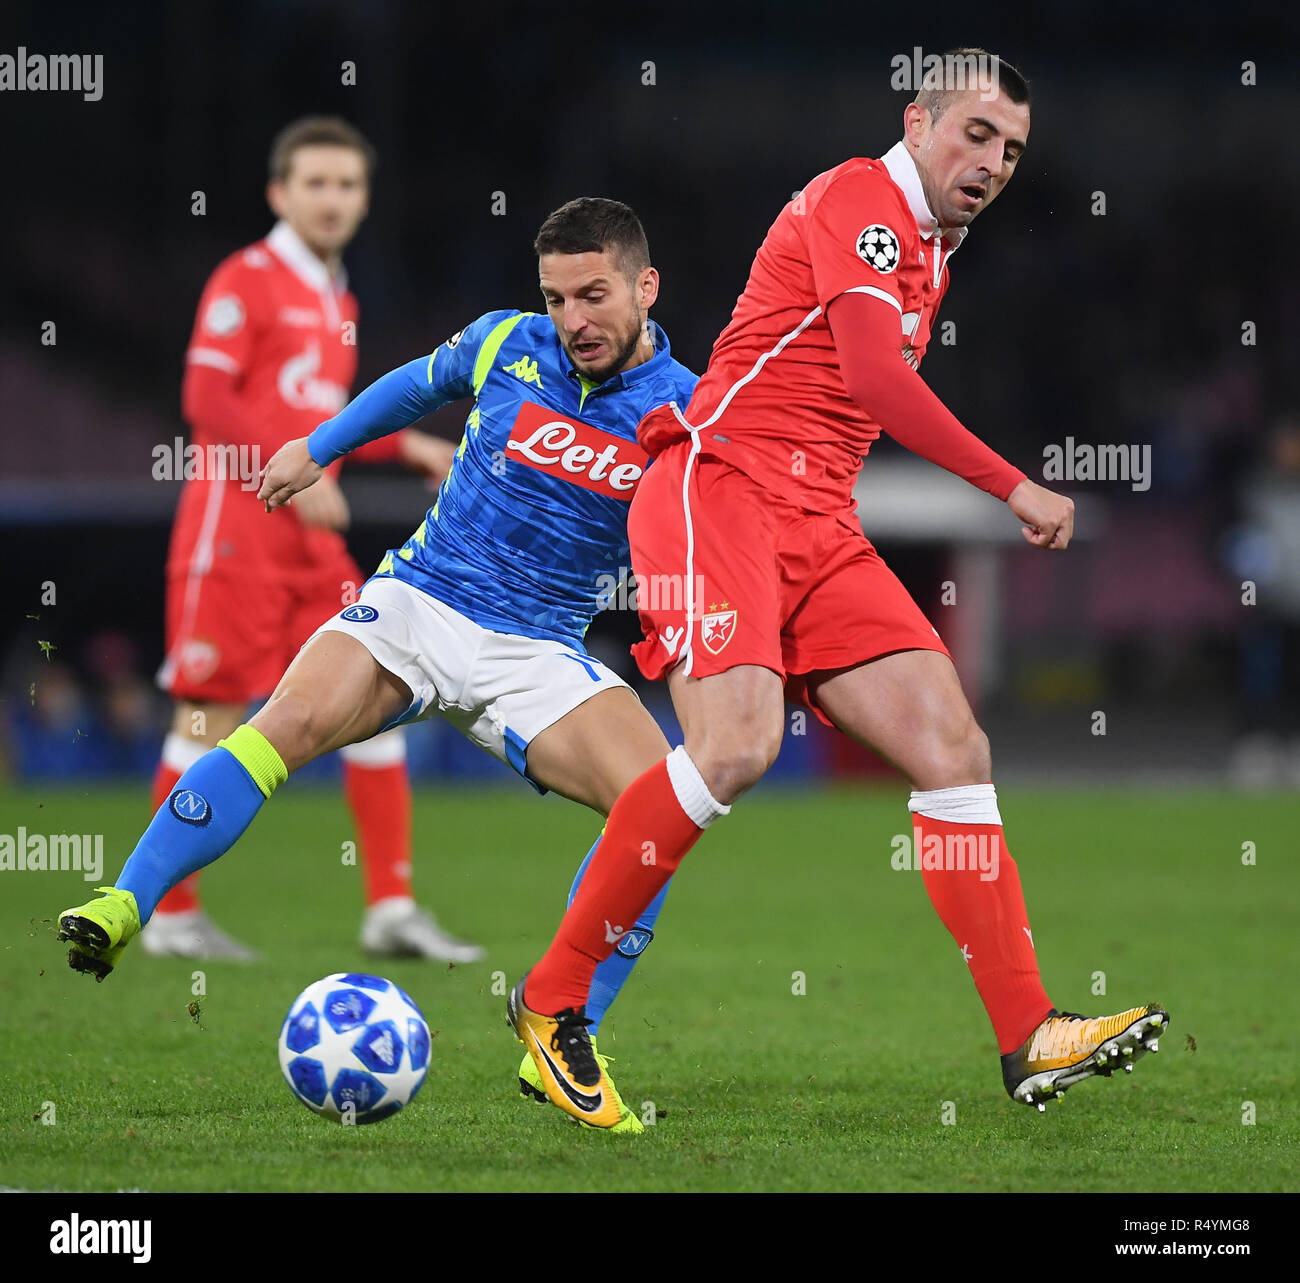 Naples, Italy. 28th Nov, 2018. Napoli's Dries Mertens (L) vies with Red Star's Nenad Krsticic during the UEFA Champions League Group C match between Napoli and Red Star Belgrade in Naples, Italy, Nov. 28, 2018. Napoli won 3-1. Credit: Alberto Lingria/Xinhua/Alamy Live News Stock Photo